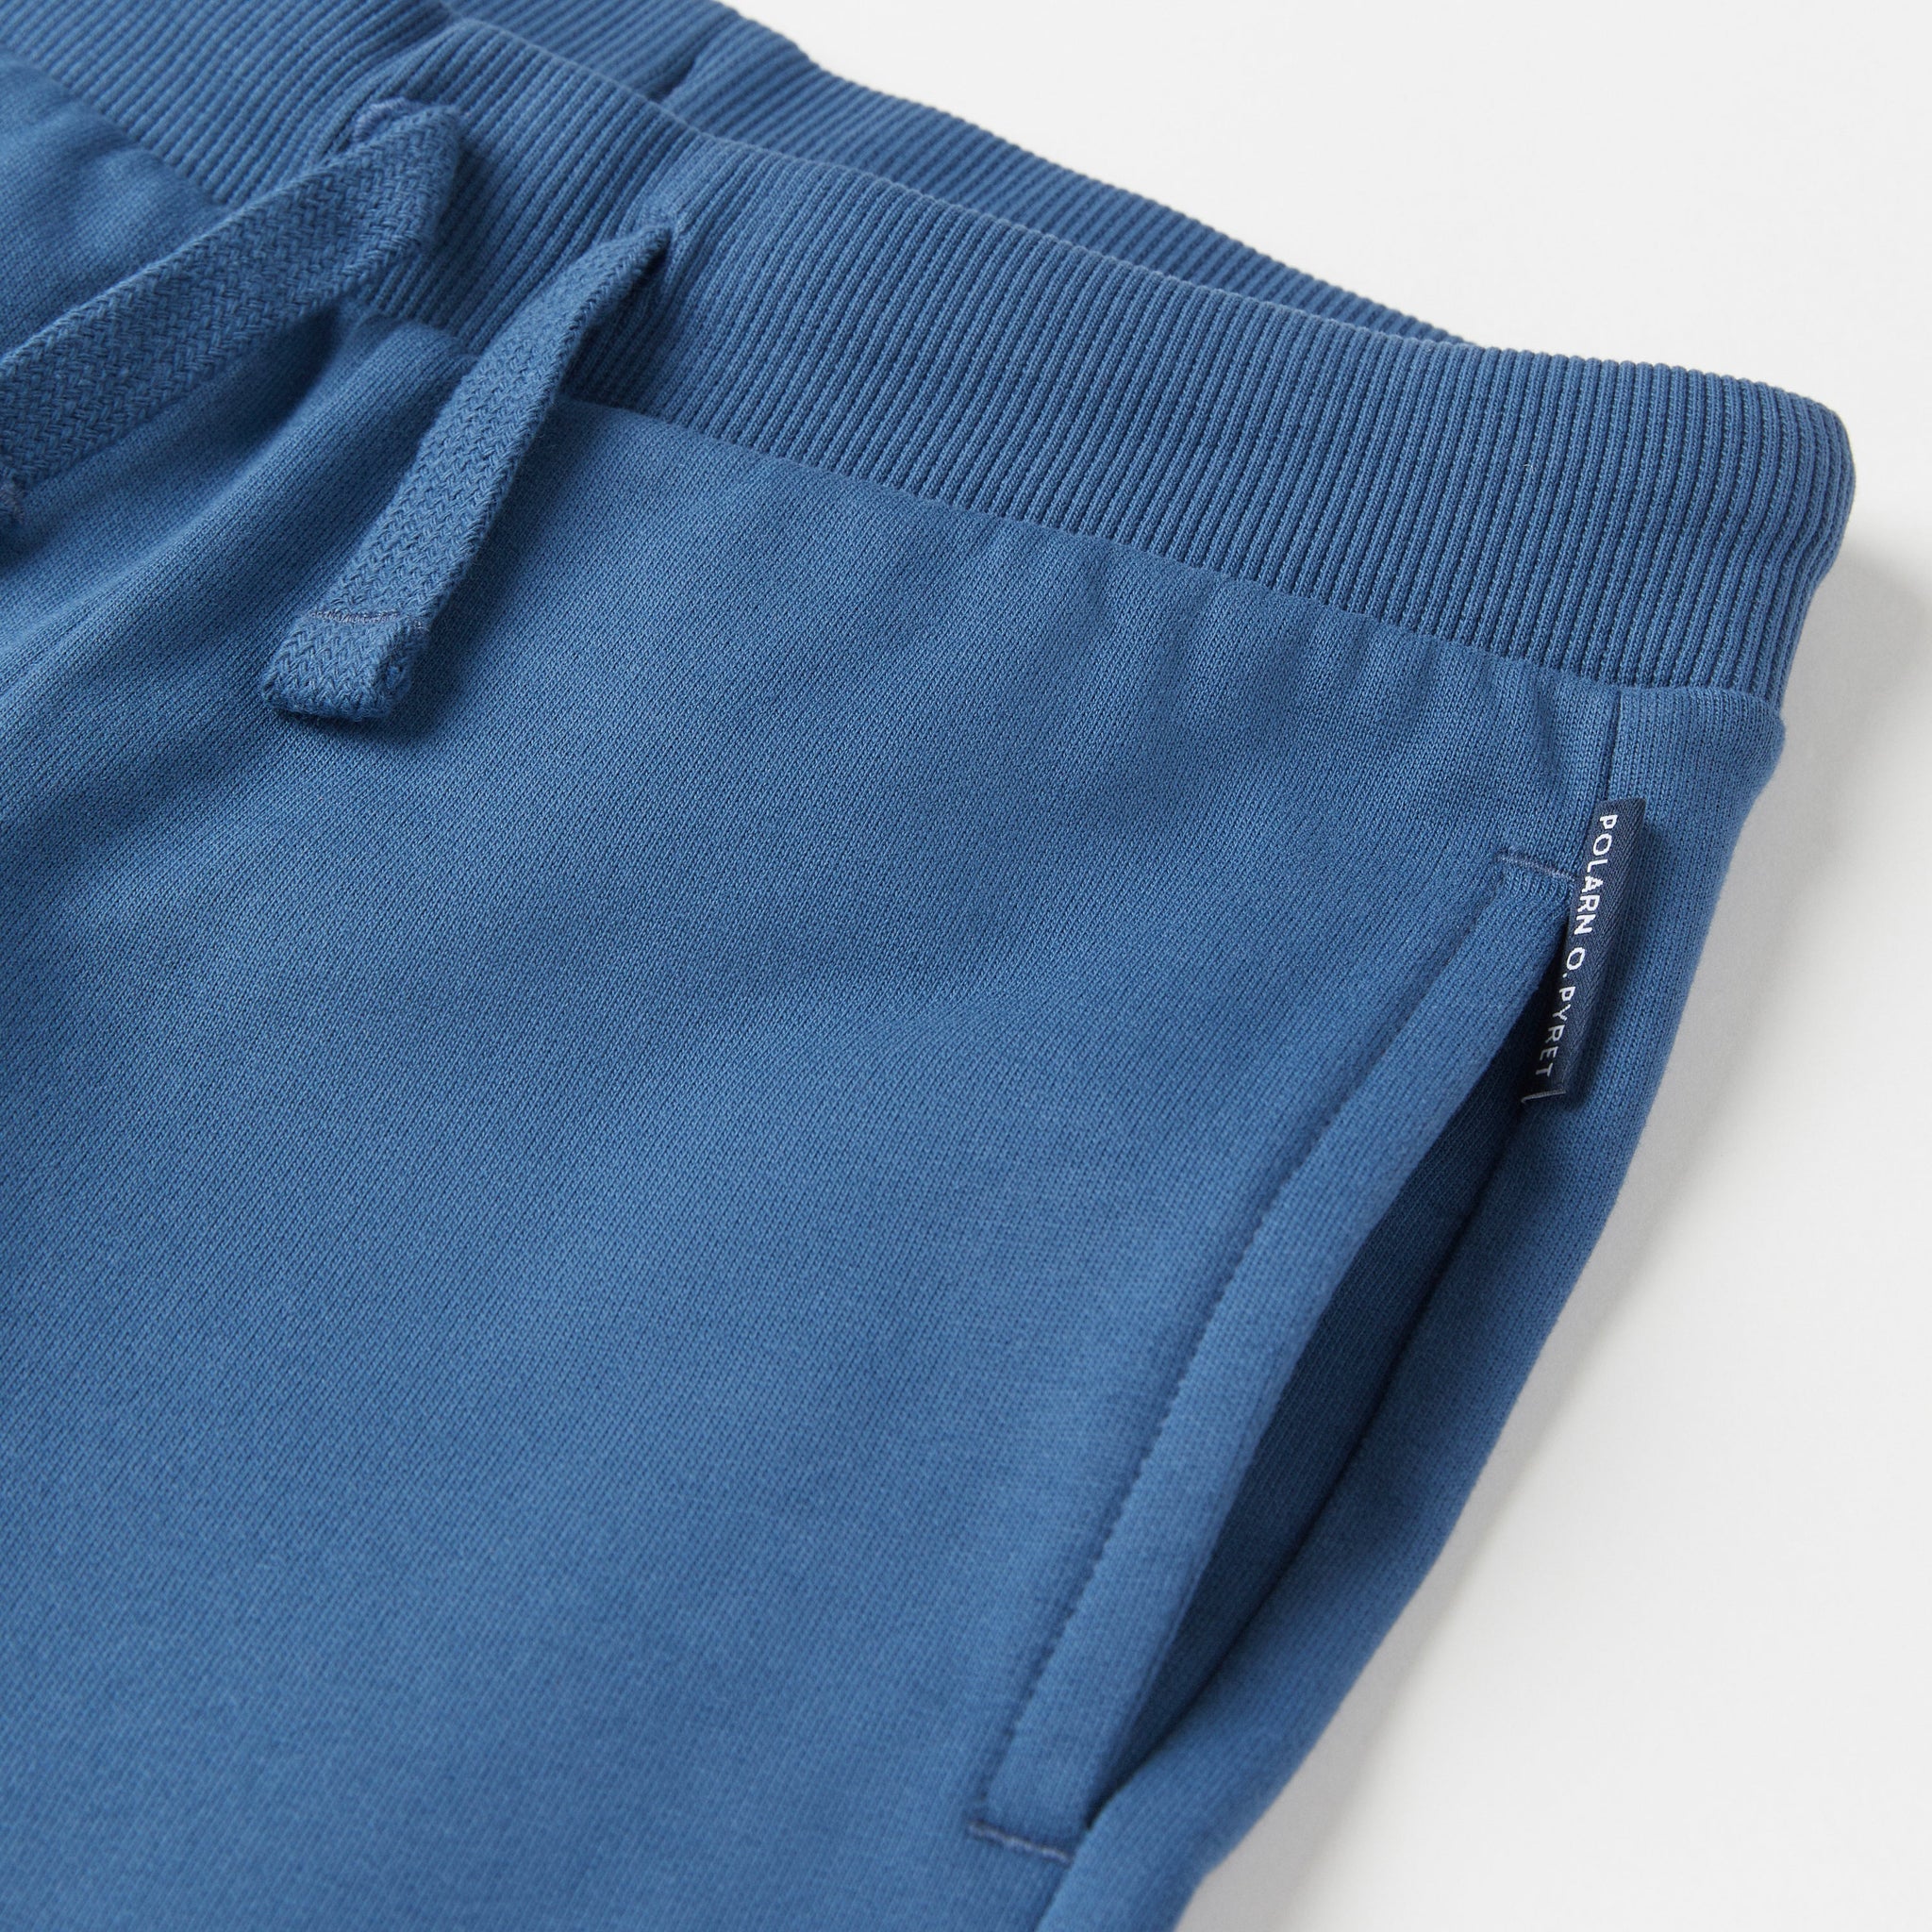 Organic Cotton Blue Kids Joggers from the Polarn O. Pyret Kidswear collection. Nordic kids clothes made from sustainable sources.